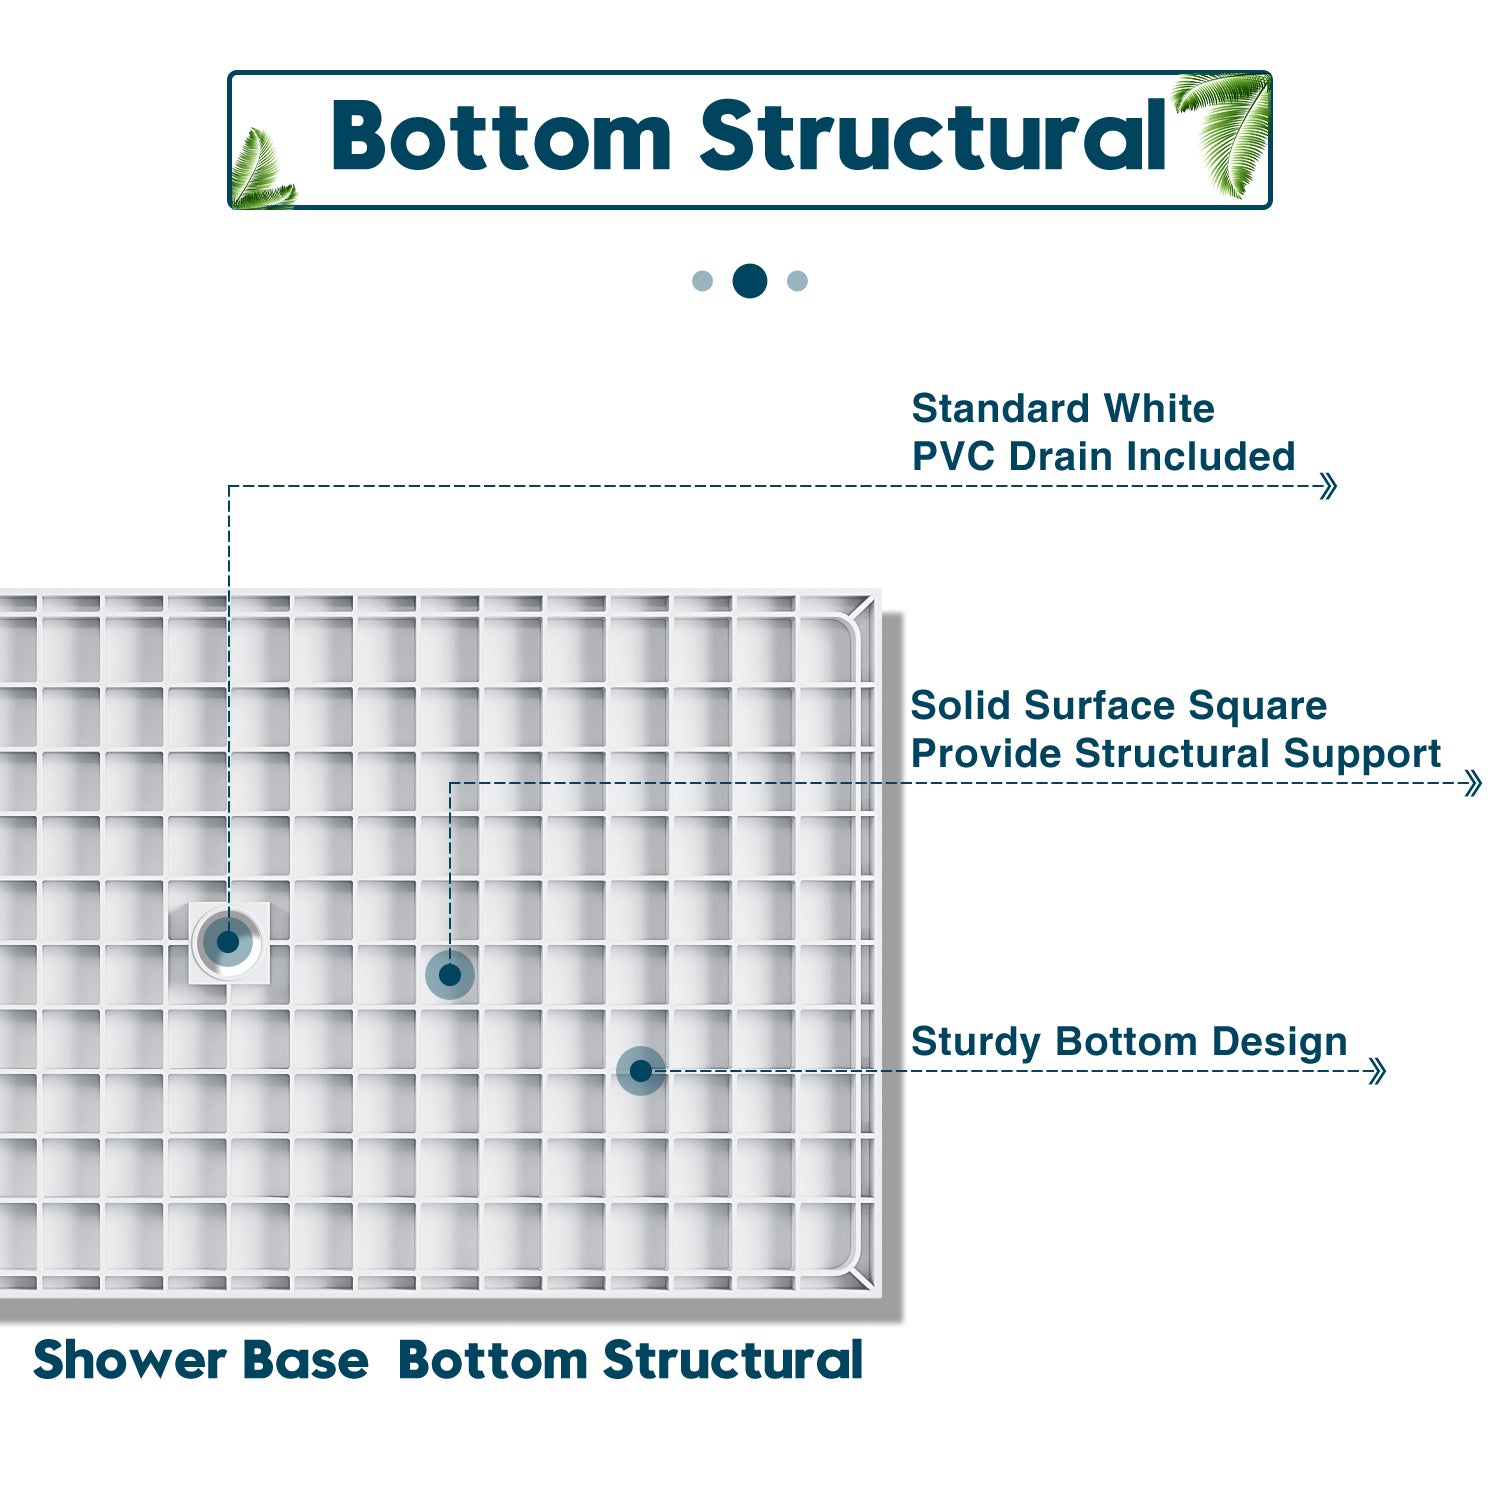 bottom structural（standard white pcv drain included）（solid surface square provide structural support）（sturdy bottom design）